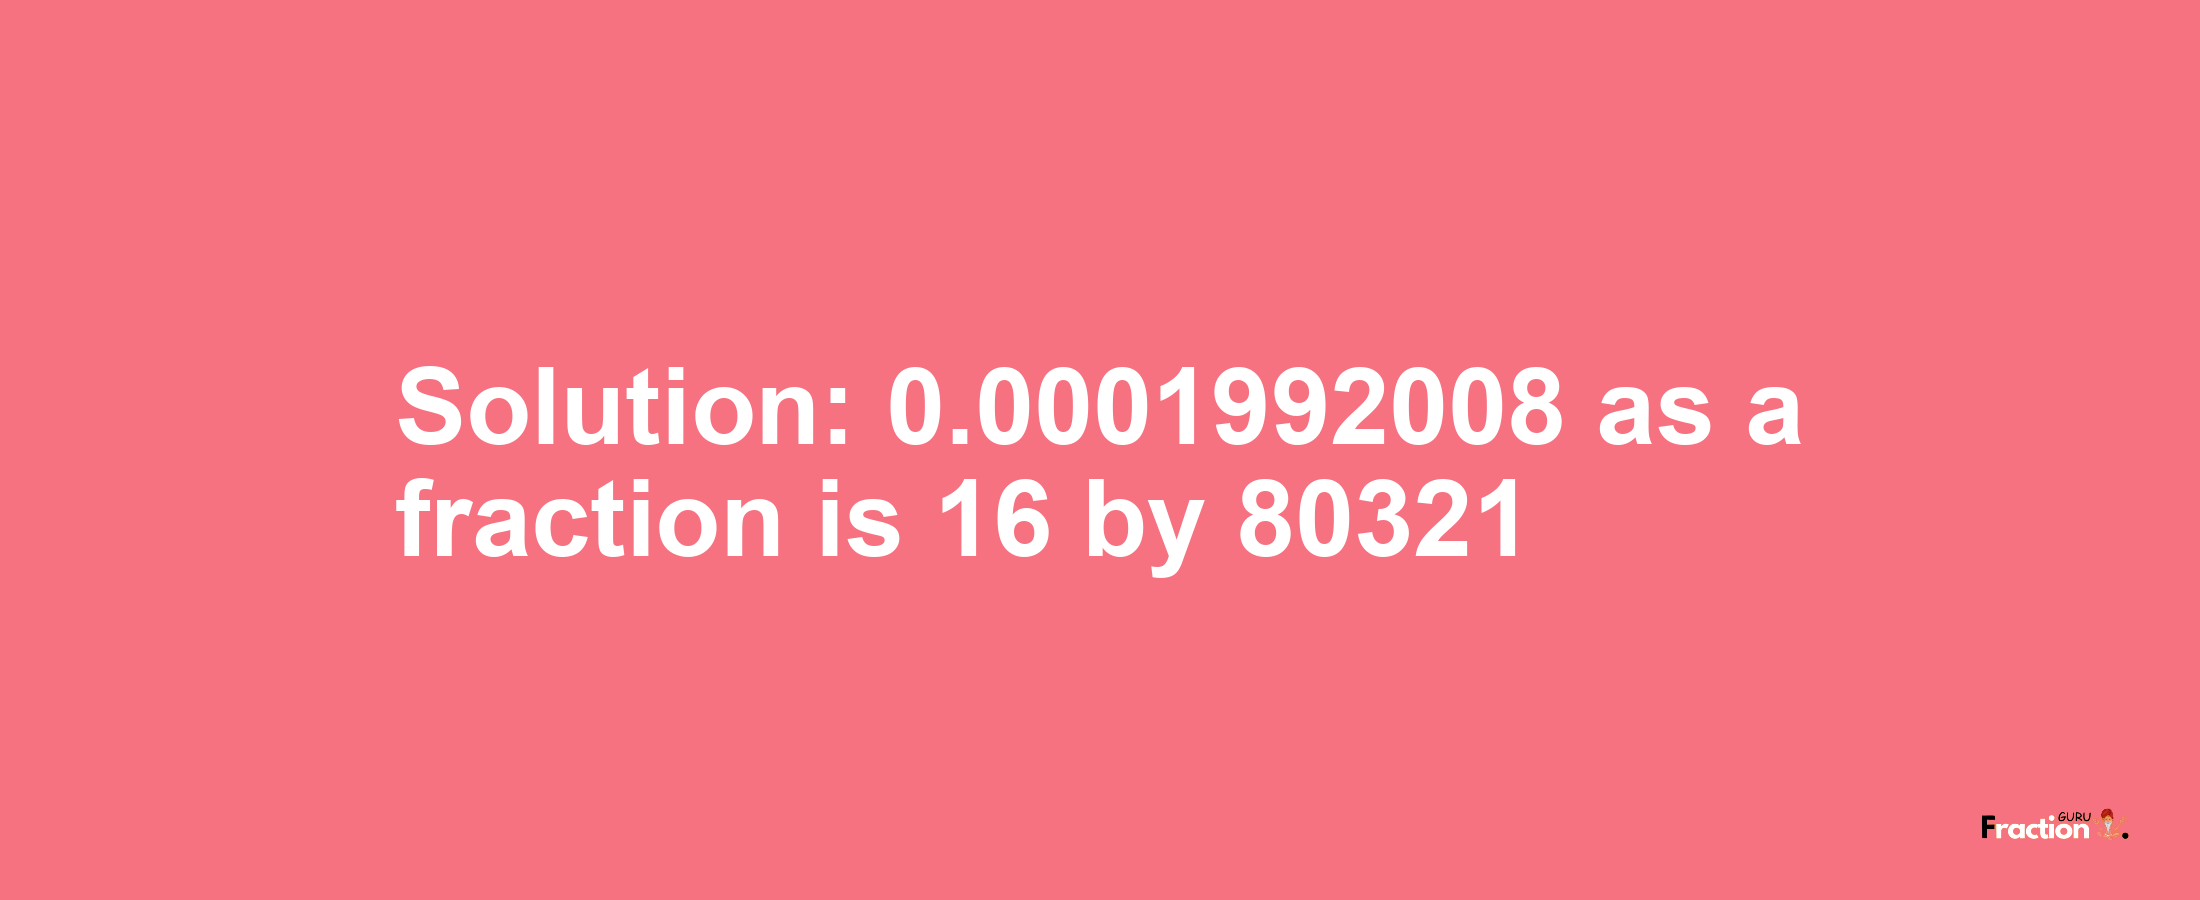 Solution:0.0001992008 as a fraction is 16/80321